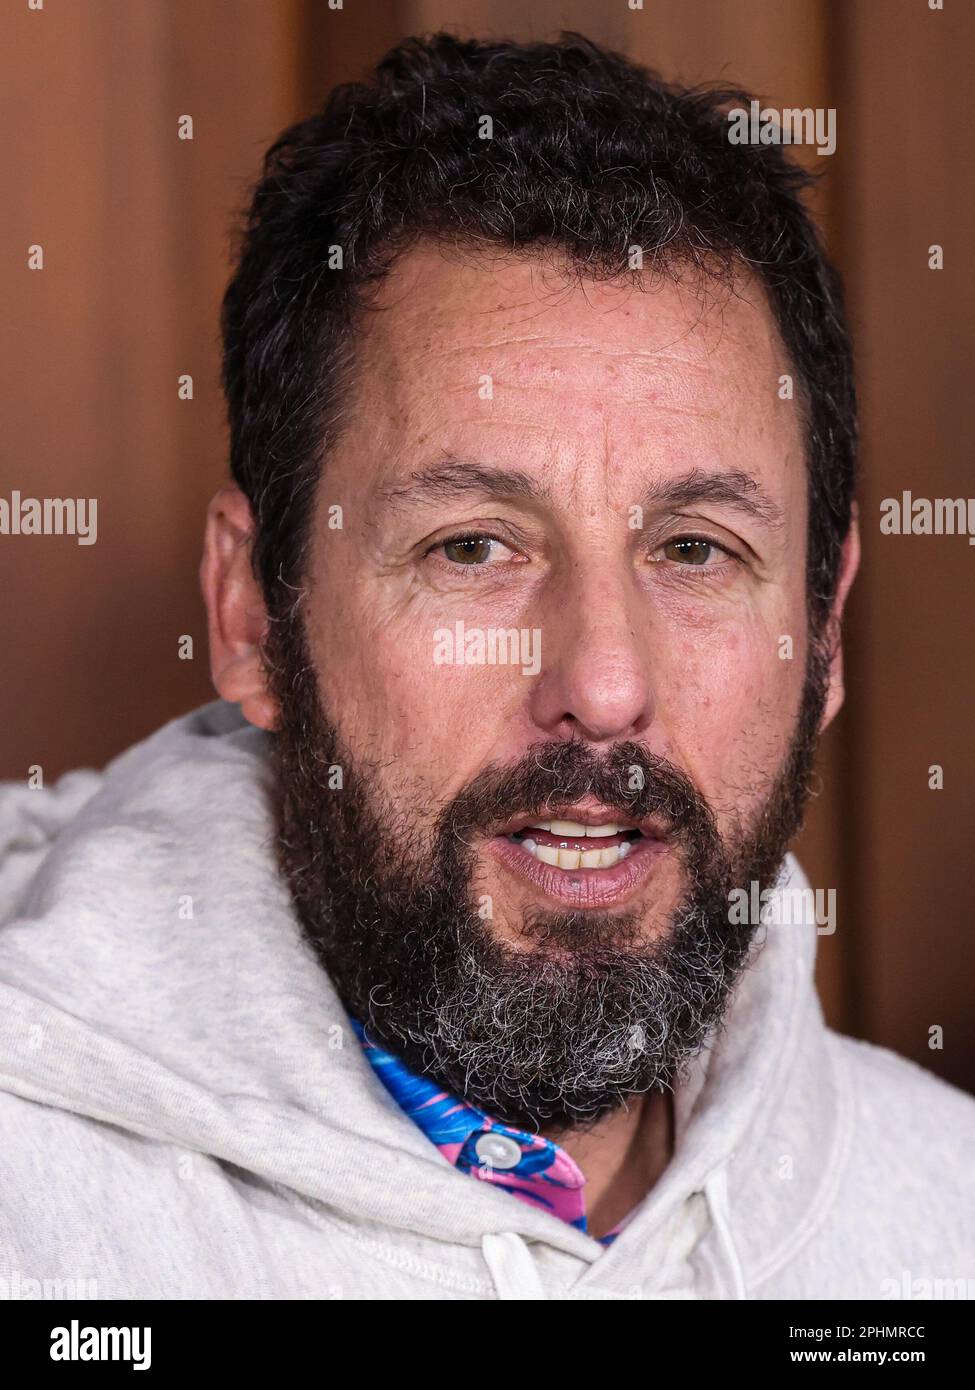 WESTWOOD, LOS ANGELES, CALIFORNIA, USA - MARCH 28: American comedian, actor, screenwriter, producer, singer and musician Adam Sandler arrives at the Los Angeles Premiere Of Netflix's 'Murder Mystery 2' held at the Regency Village Theatre on March 28, 2023 in Westwood, Los Angeles, California, United States. (Photo by Xavier Collin/Image Press Agency) Stock Photo